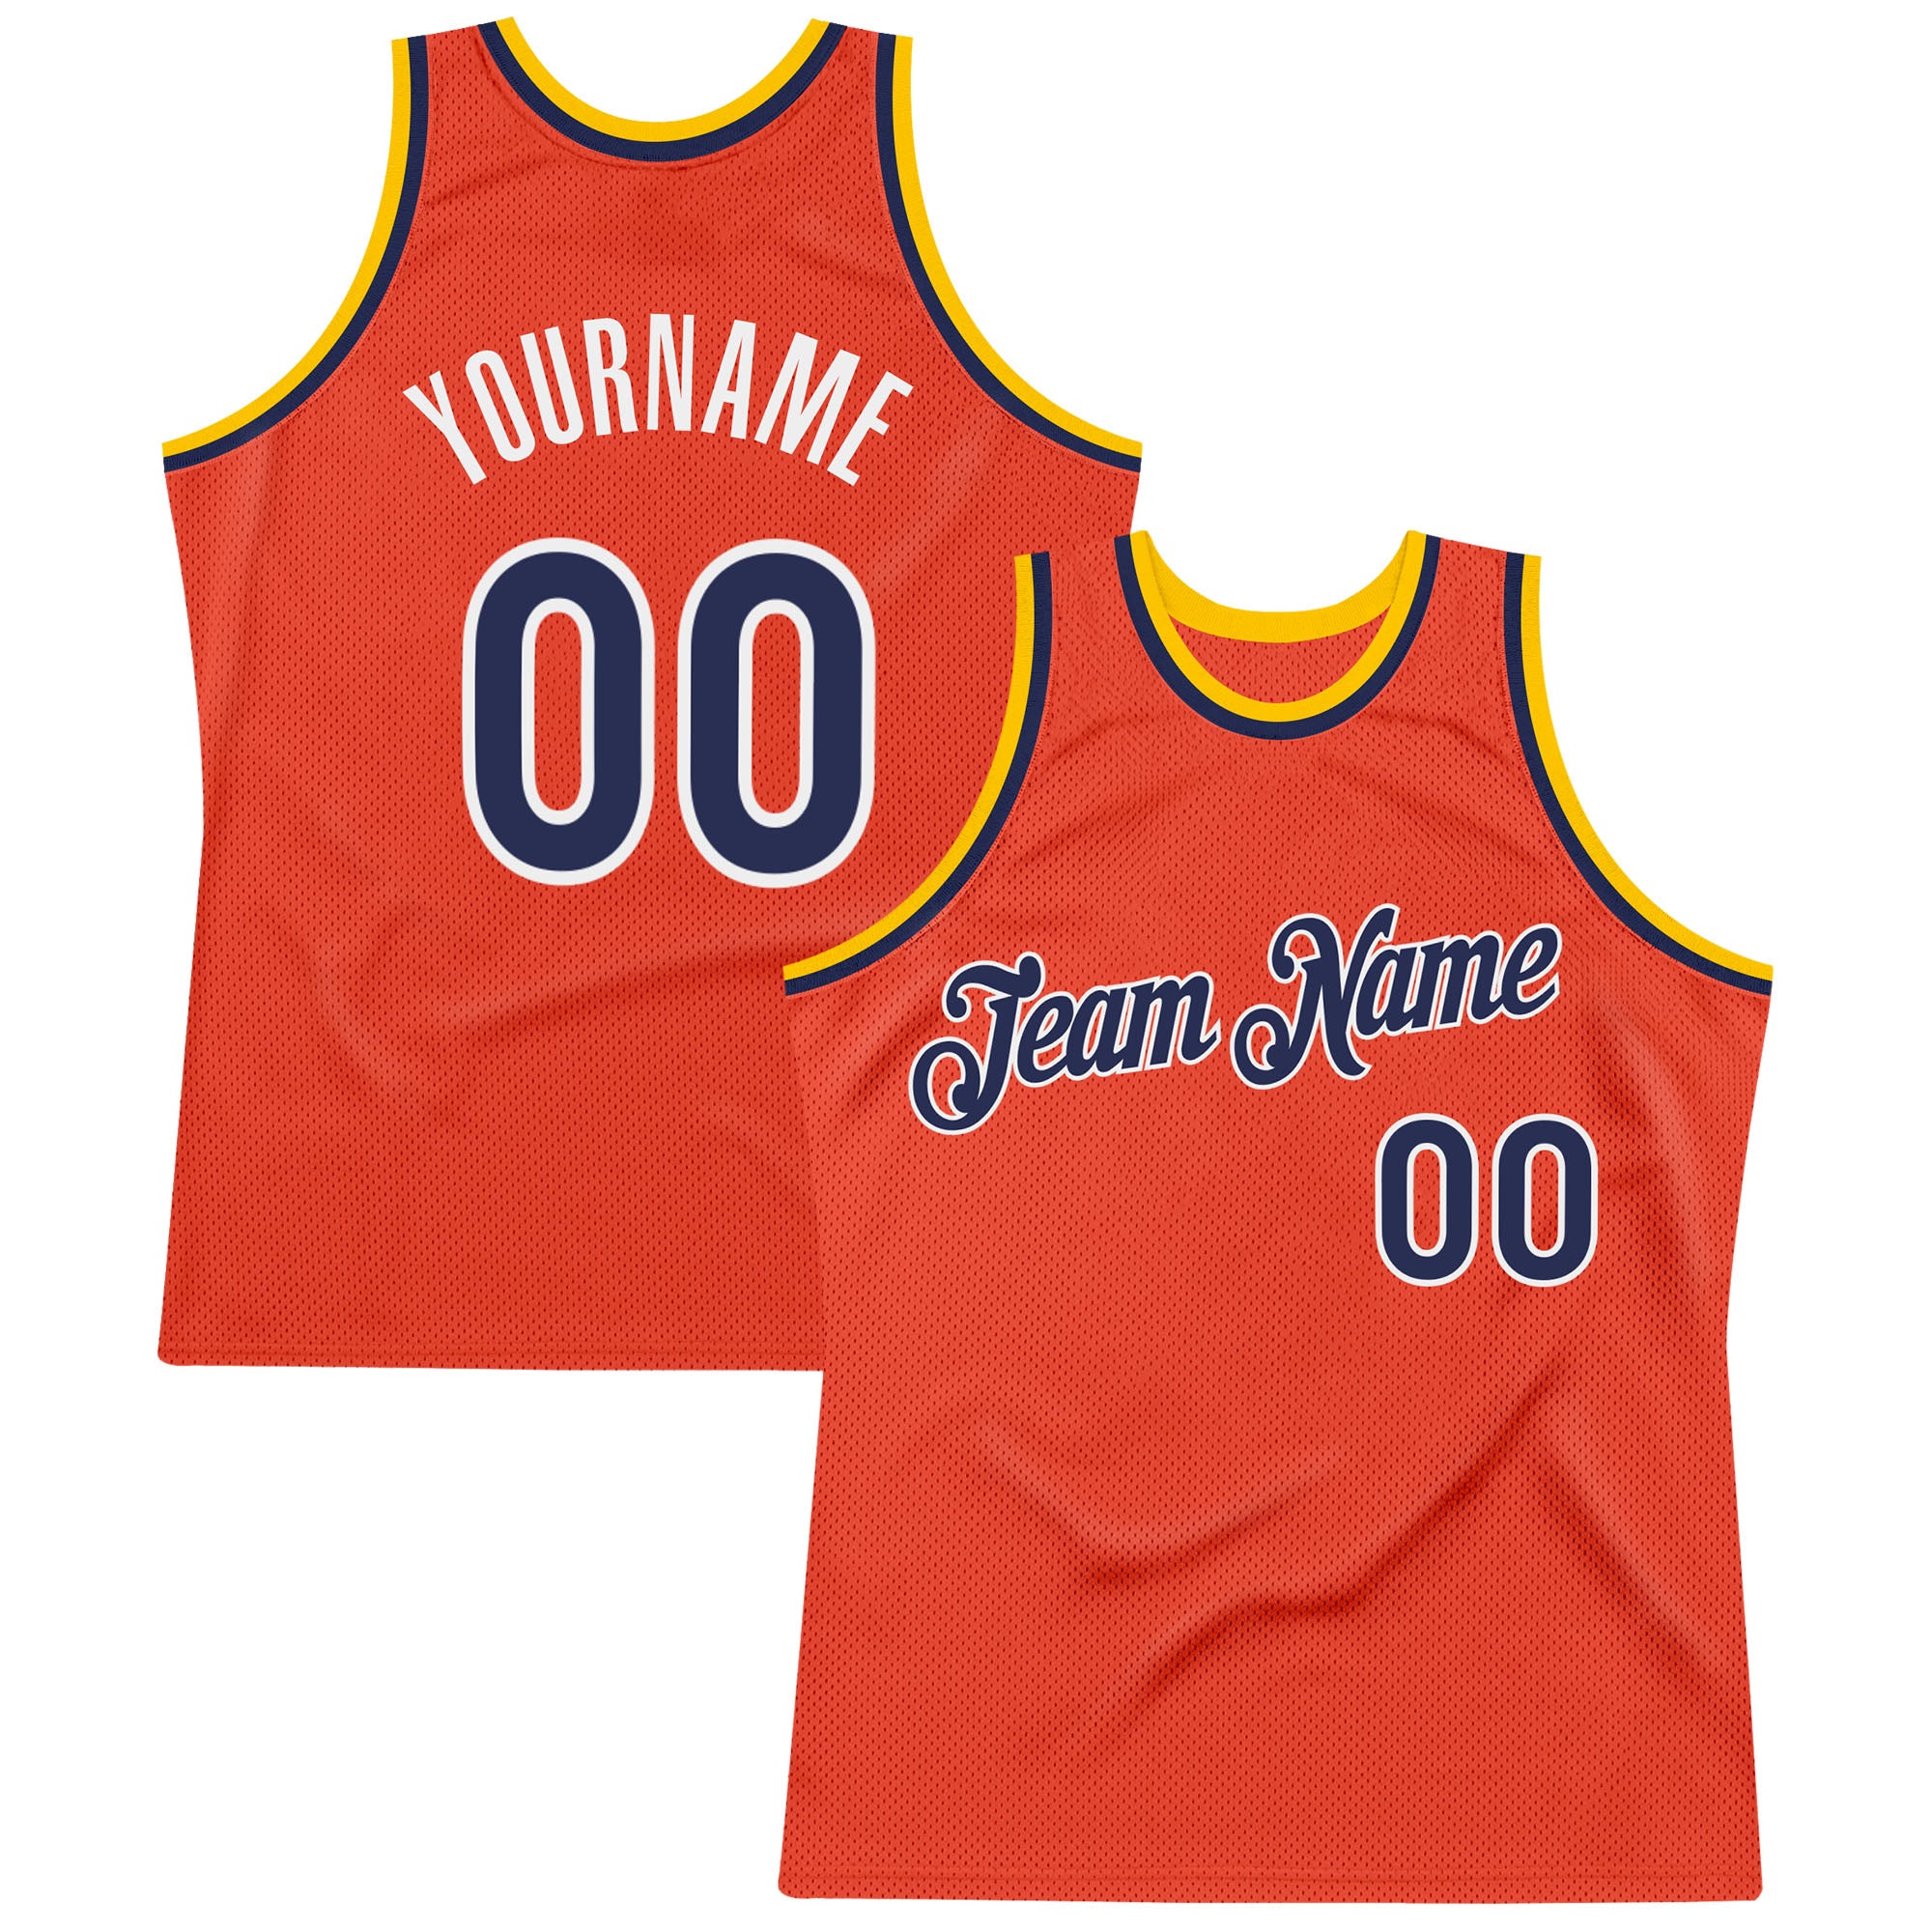 personalized golden state jersey